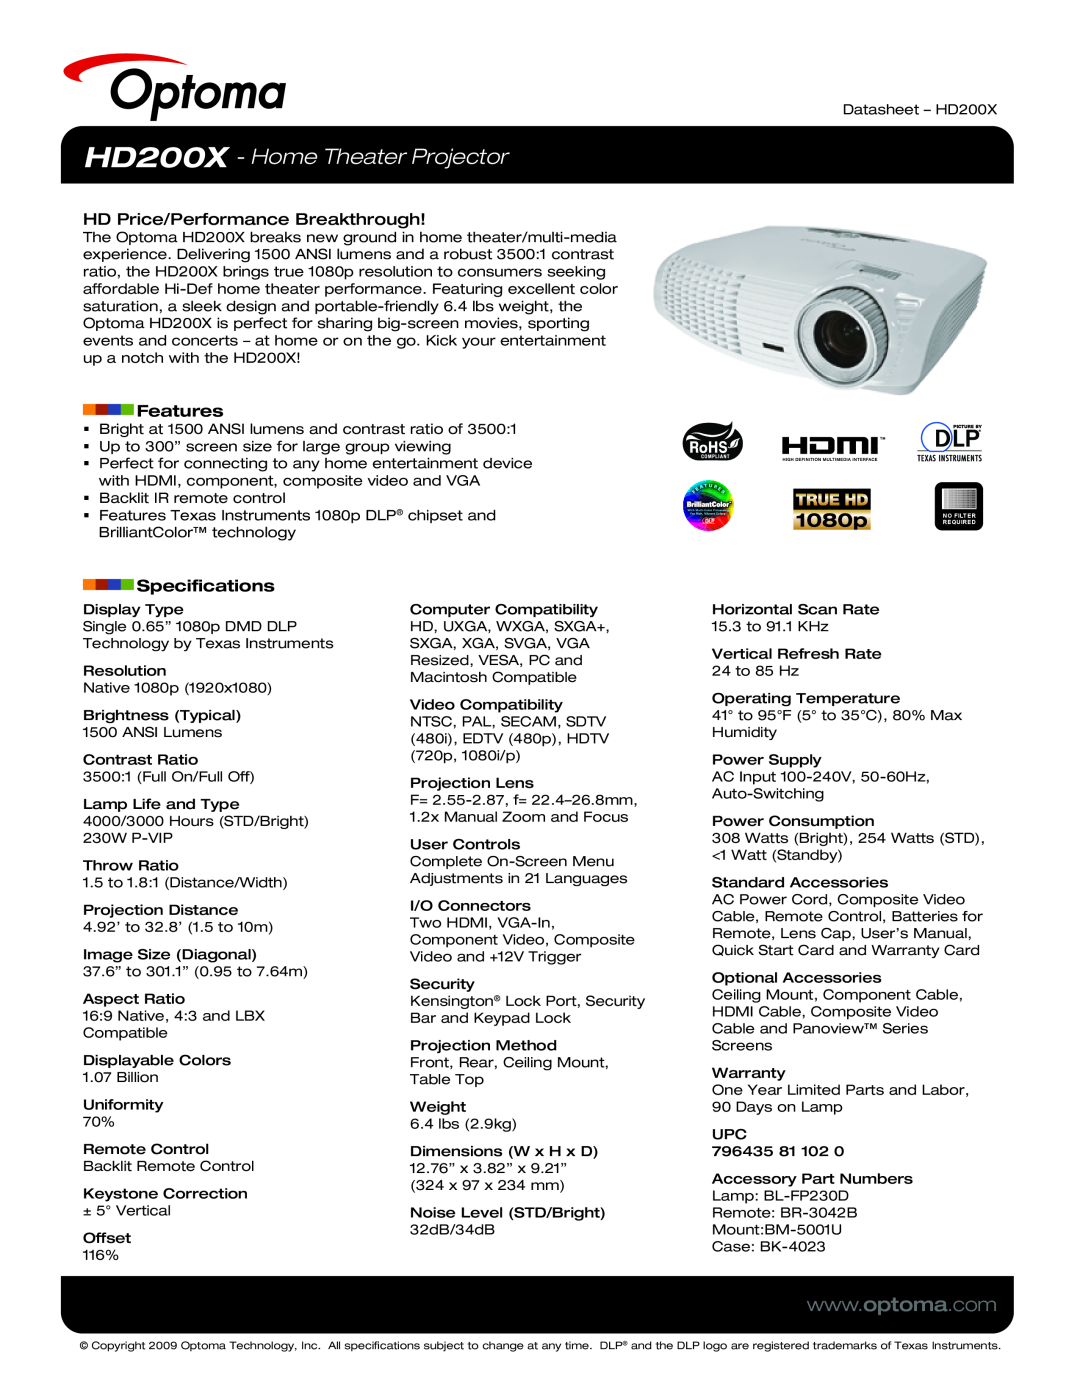 Optoma Technology specifications HD200X - Home Theater Projector, HD Price/Performance Breakthrough, Features 